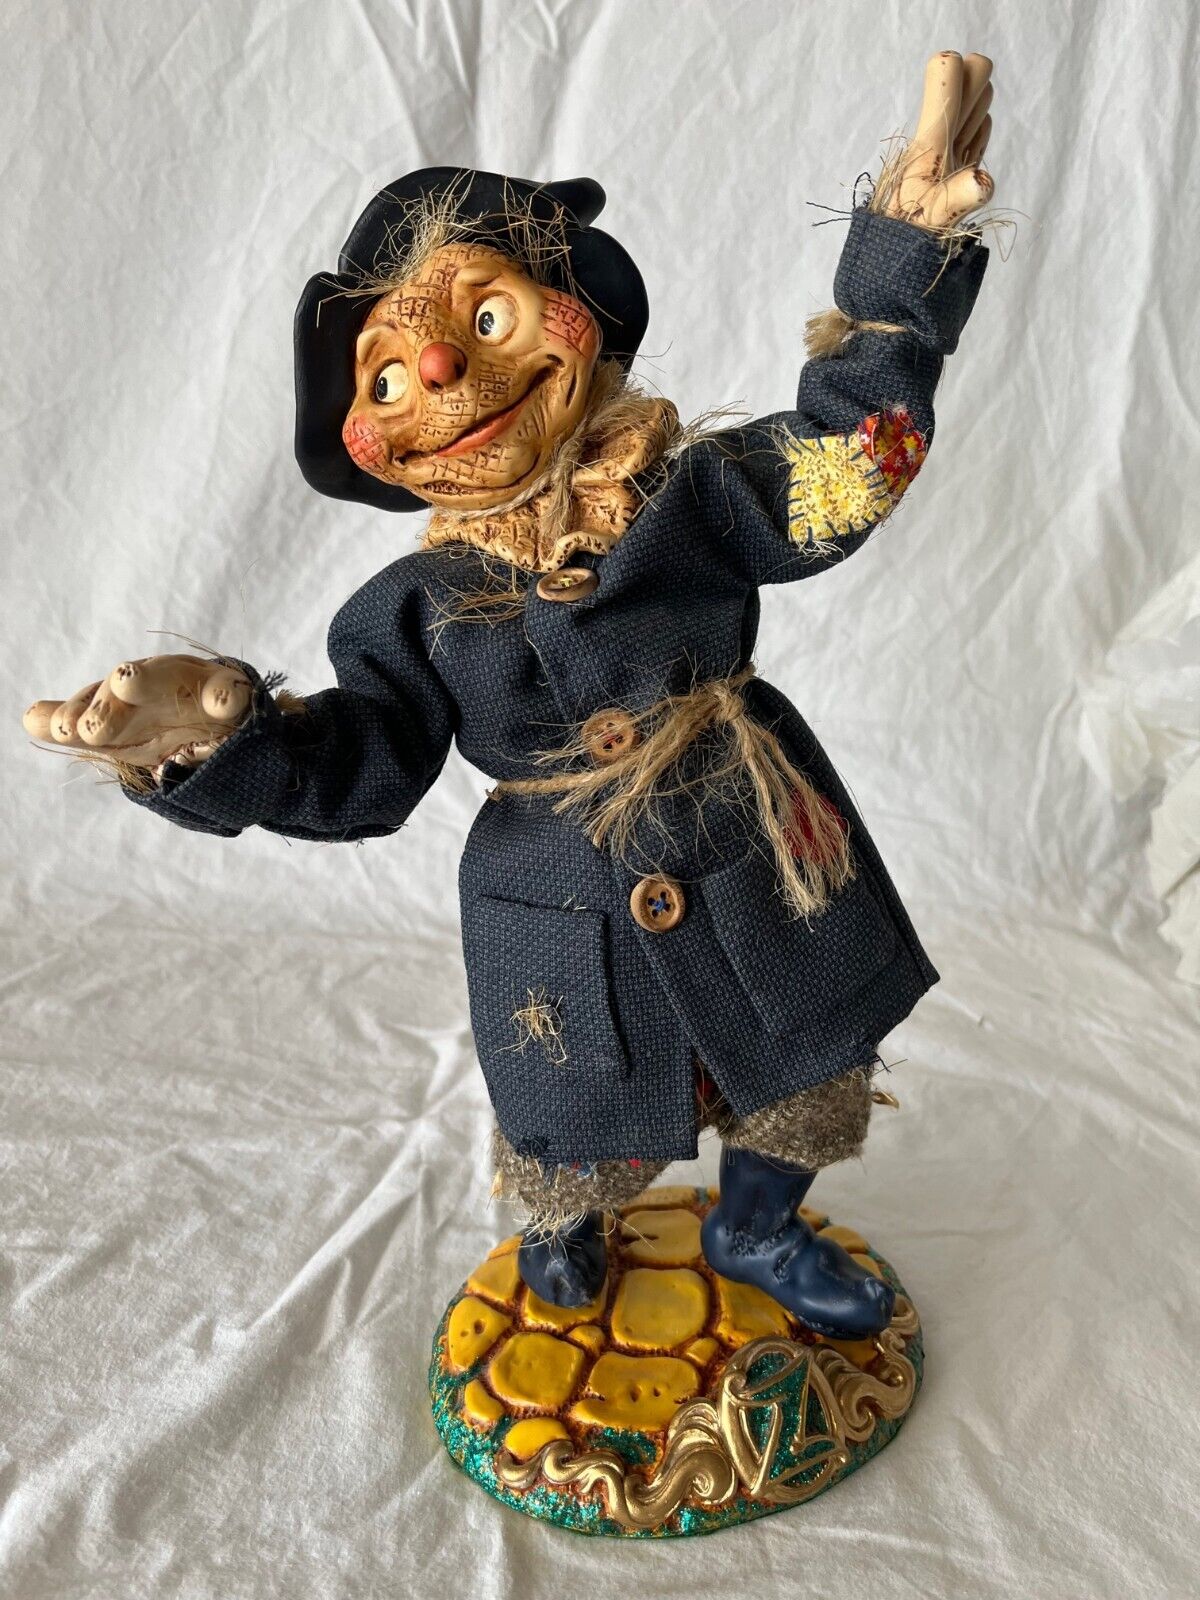 Simpich RARE Character Doll Wizard Of Oz The Scarecrow Limited Edition #242/1200